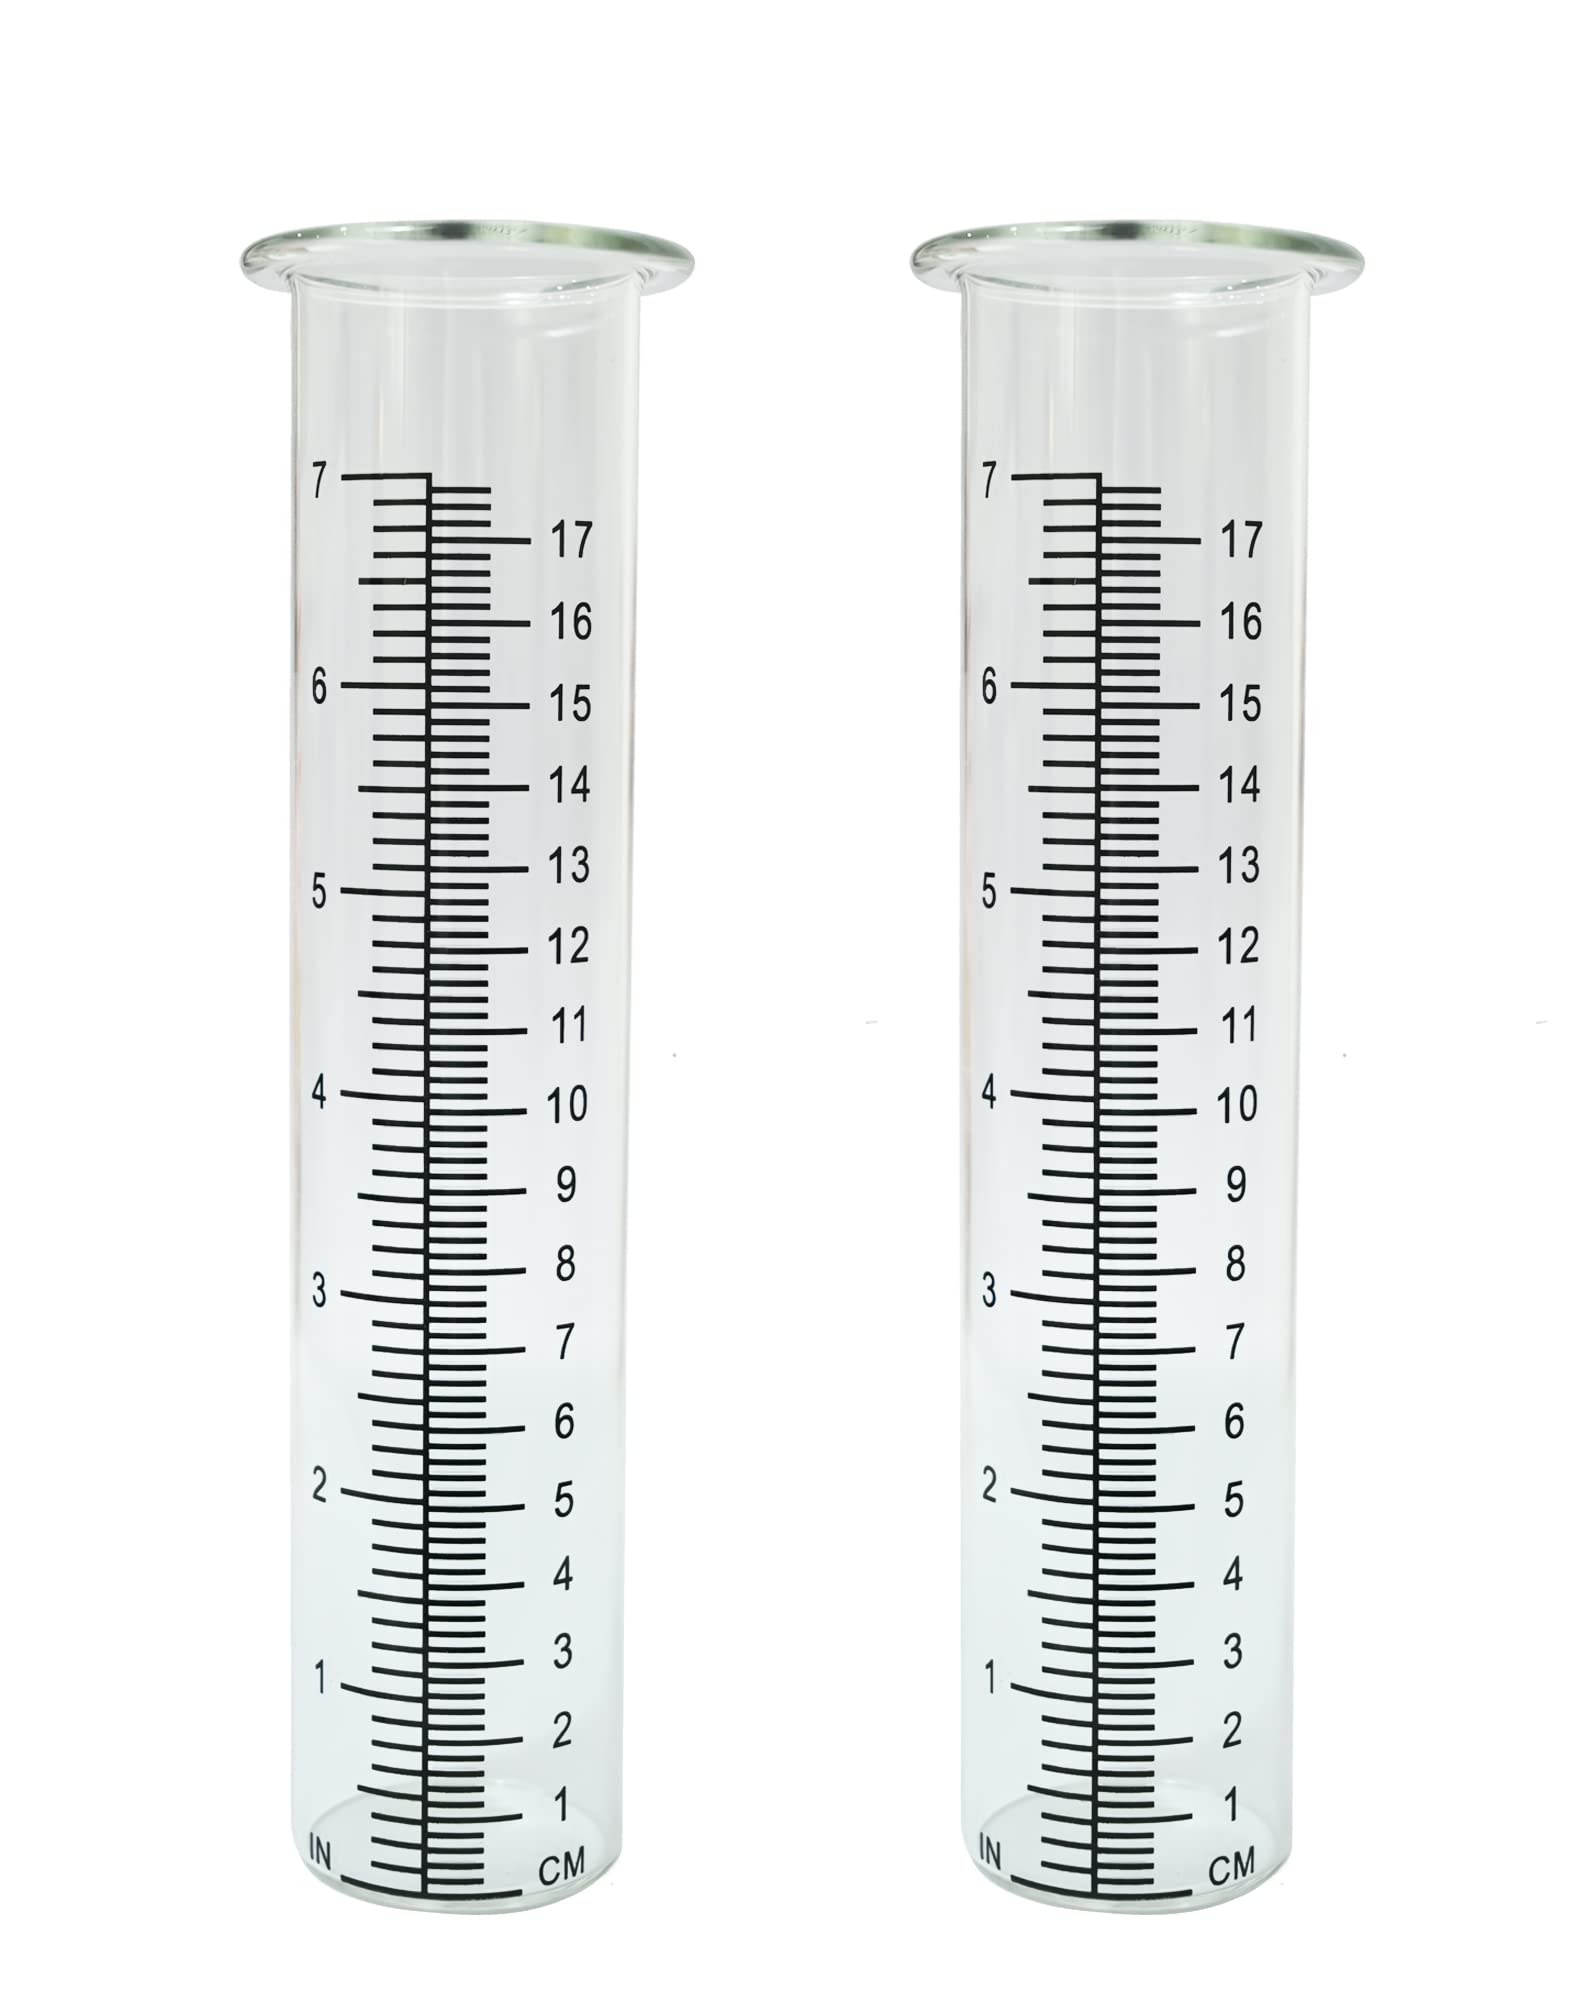 Lueudu 7" Plastic Rain Gauge Replacement Tube, 8.25 x 2.25 x 1.75 inches Cold Resistance Crack Resistance for Outdoor Garden Yard Home, 2PCS